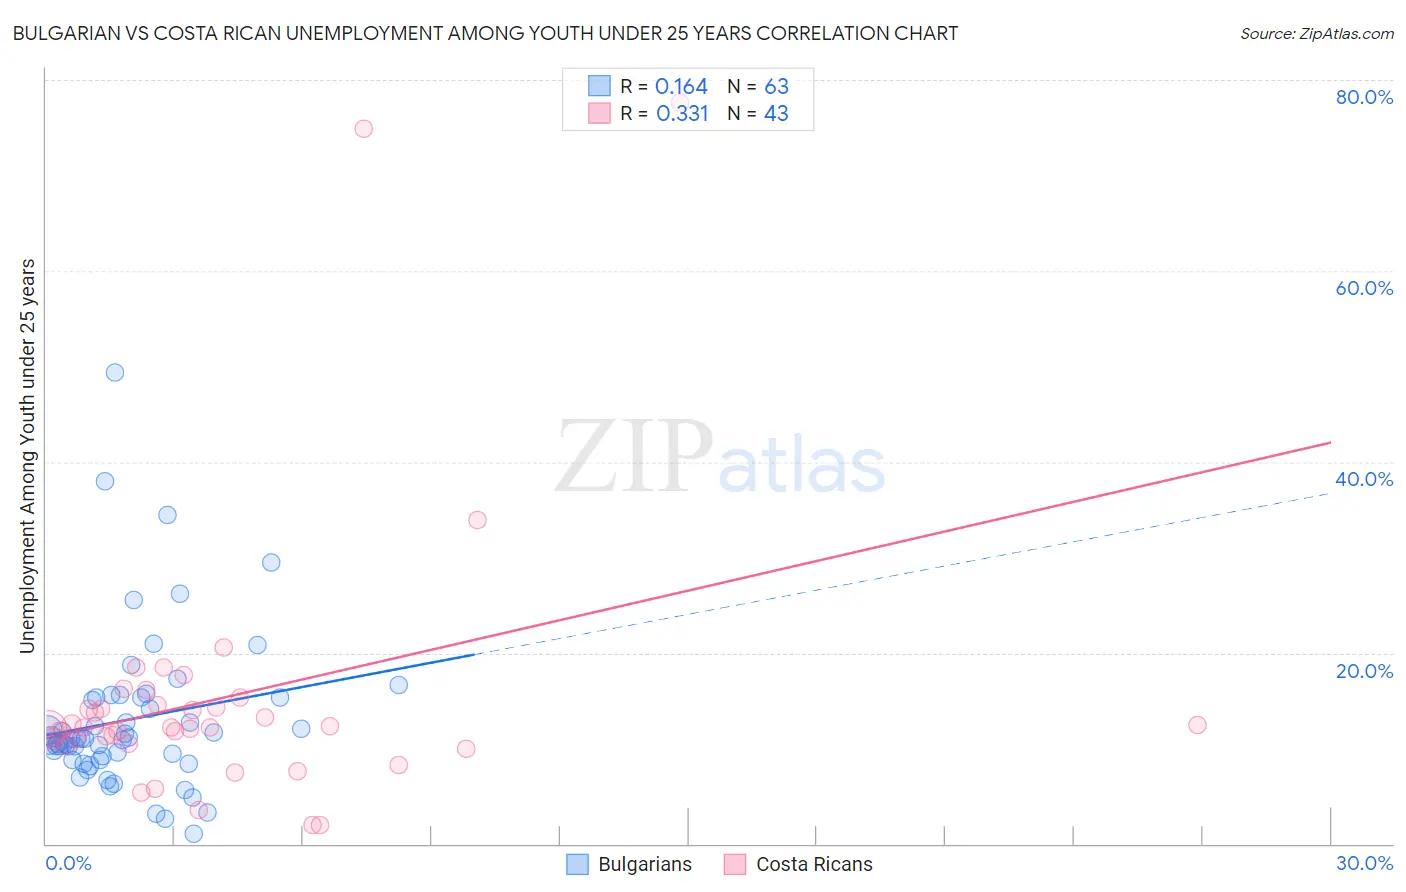 Bulgarian vs Costa Rican Unemployment Among Youth under 25 years